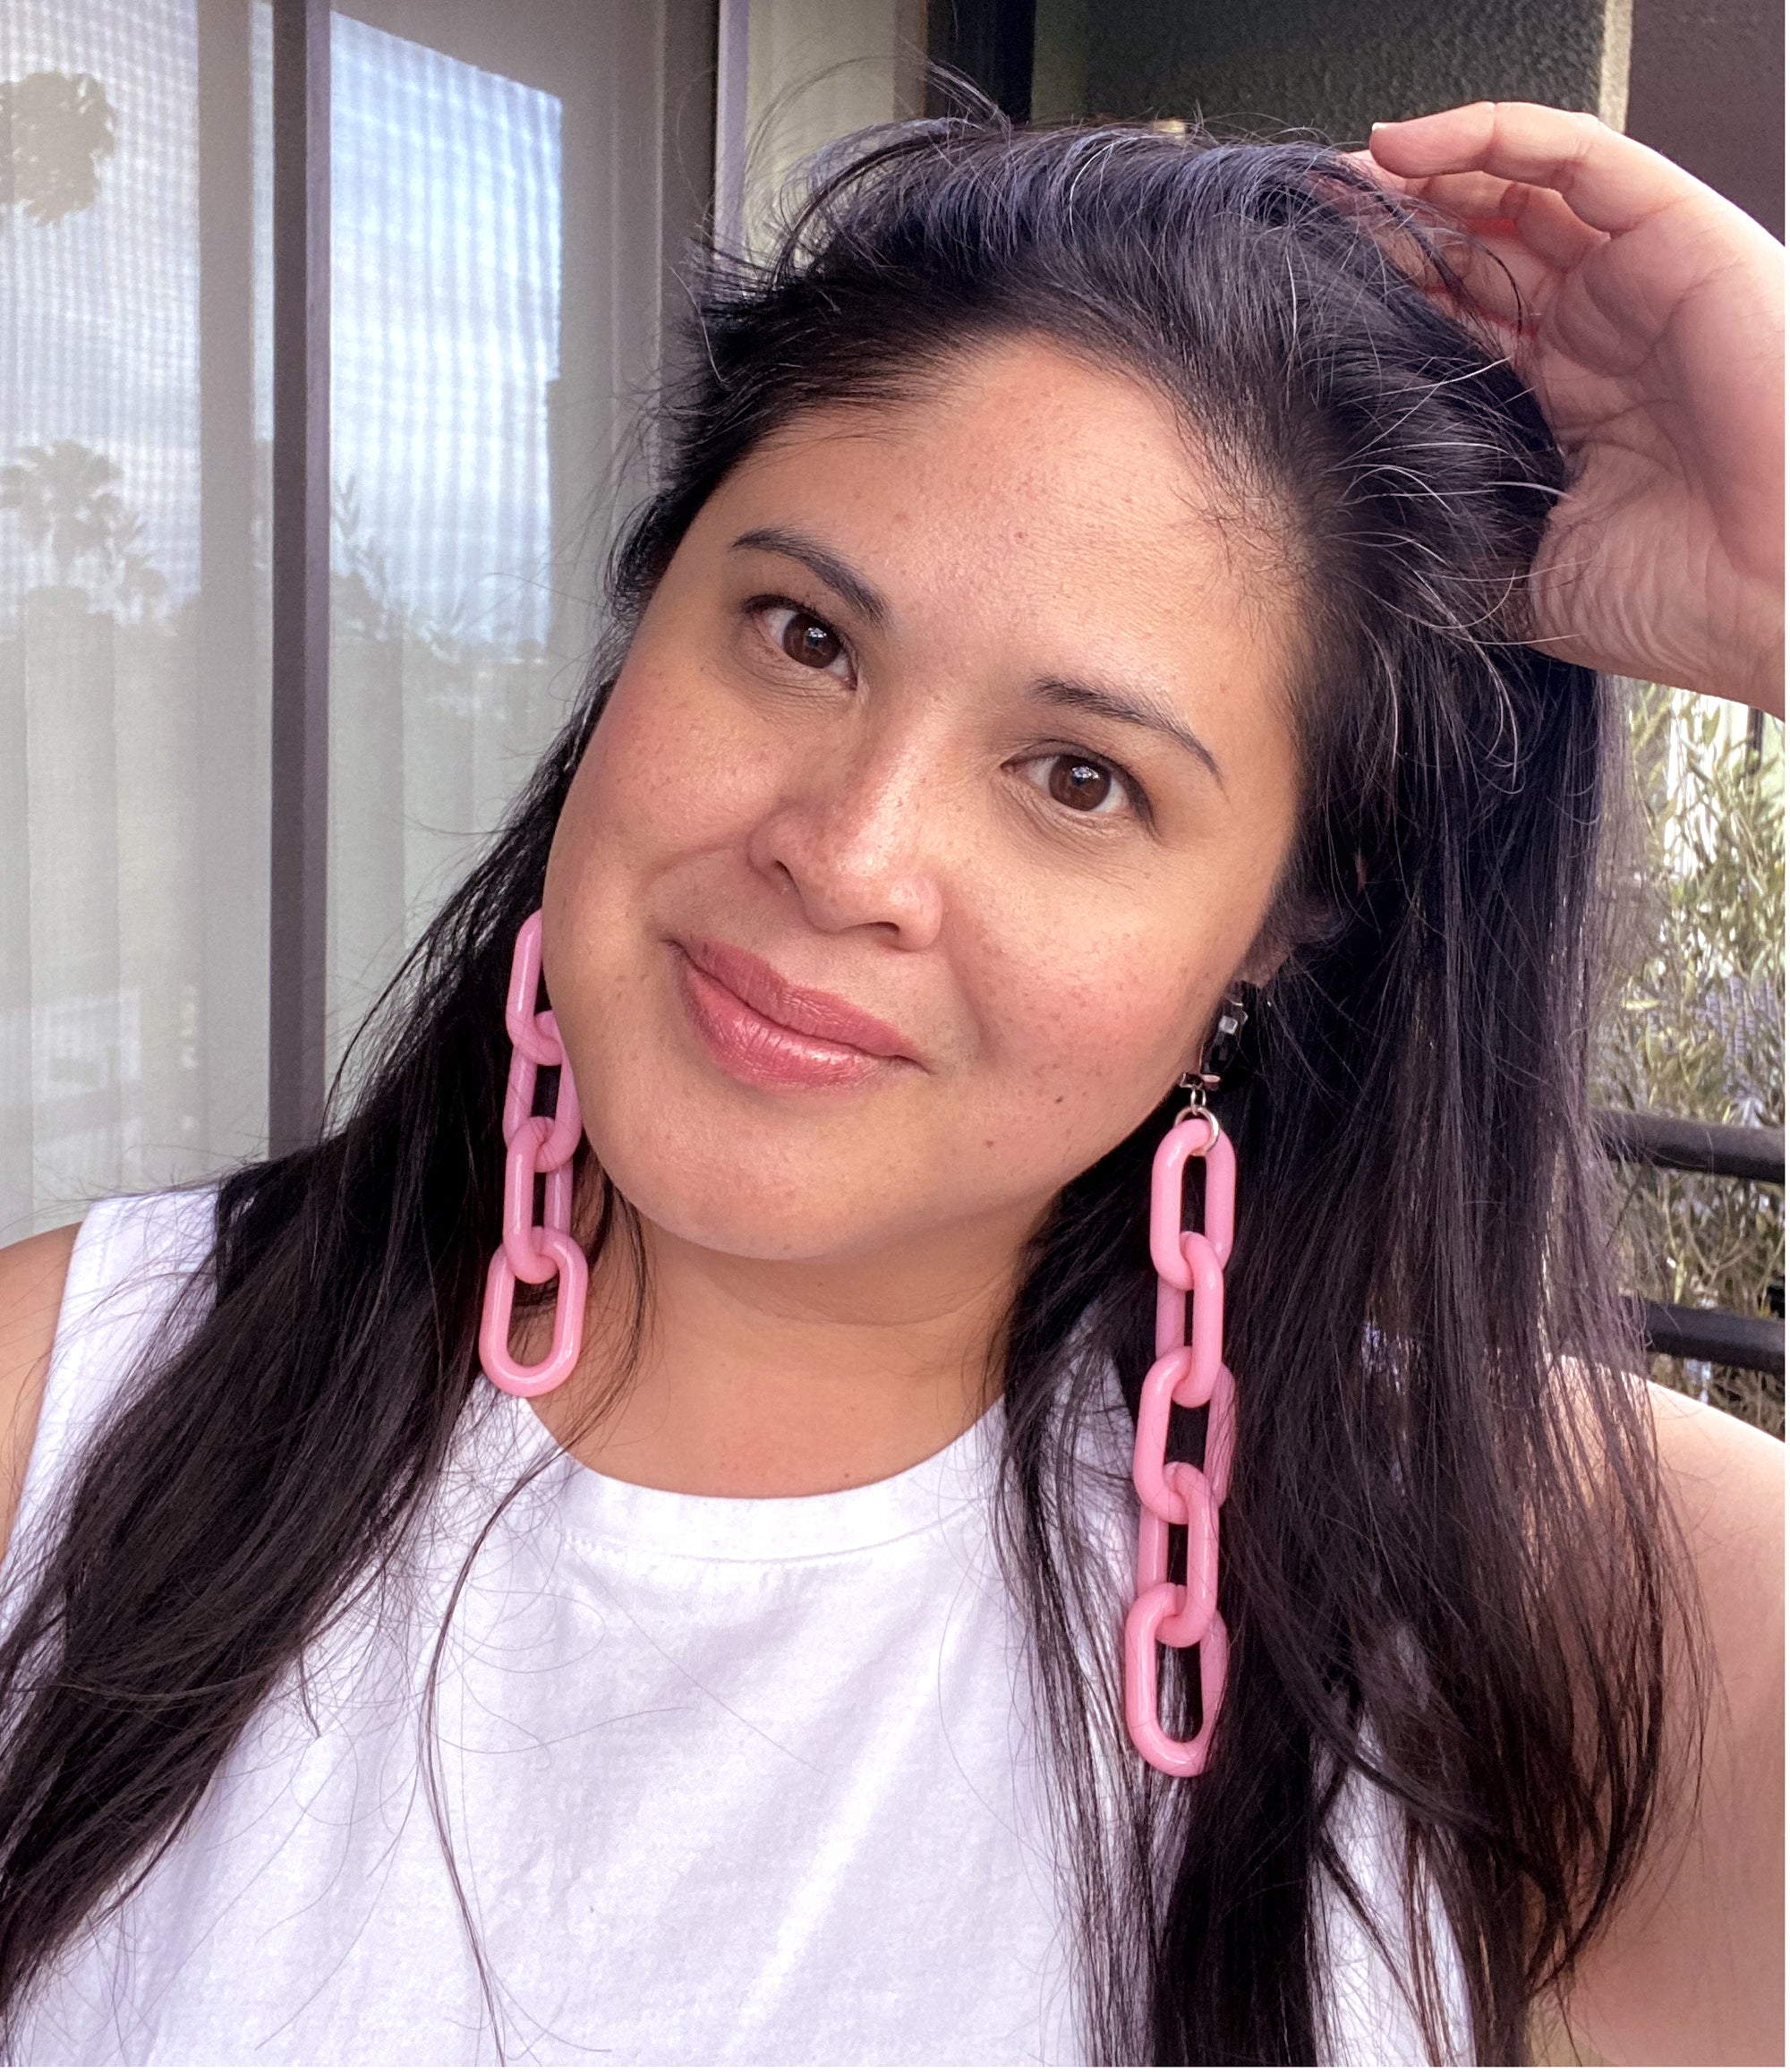 Jenny Dayco wearing black glass and pink chain earrings